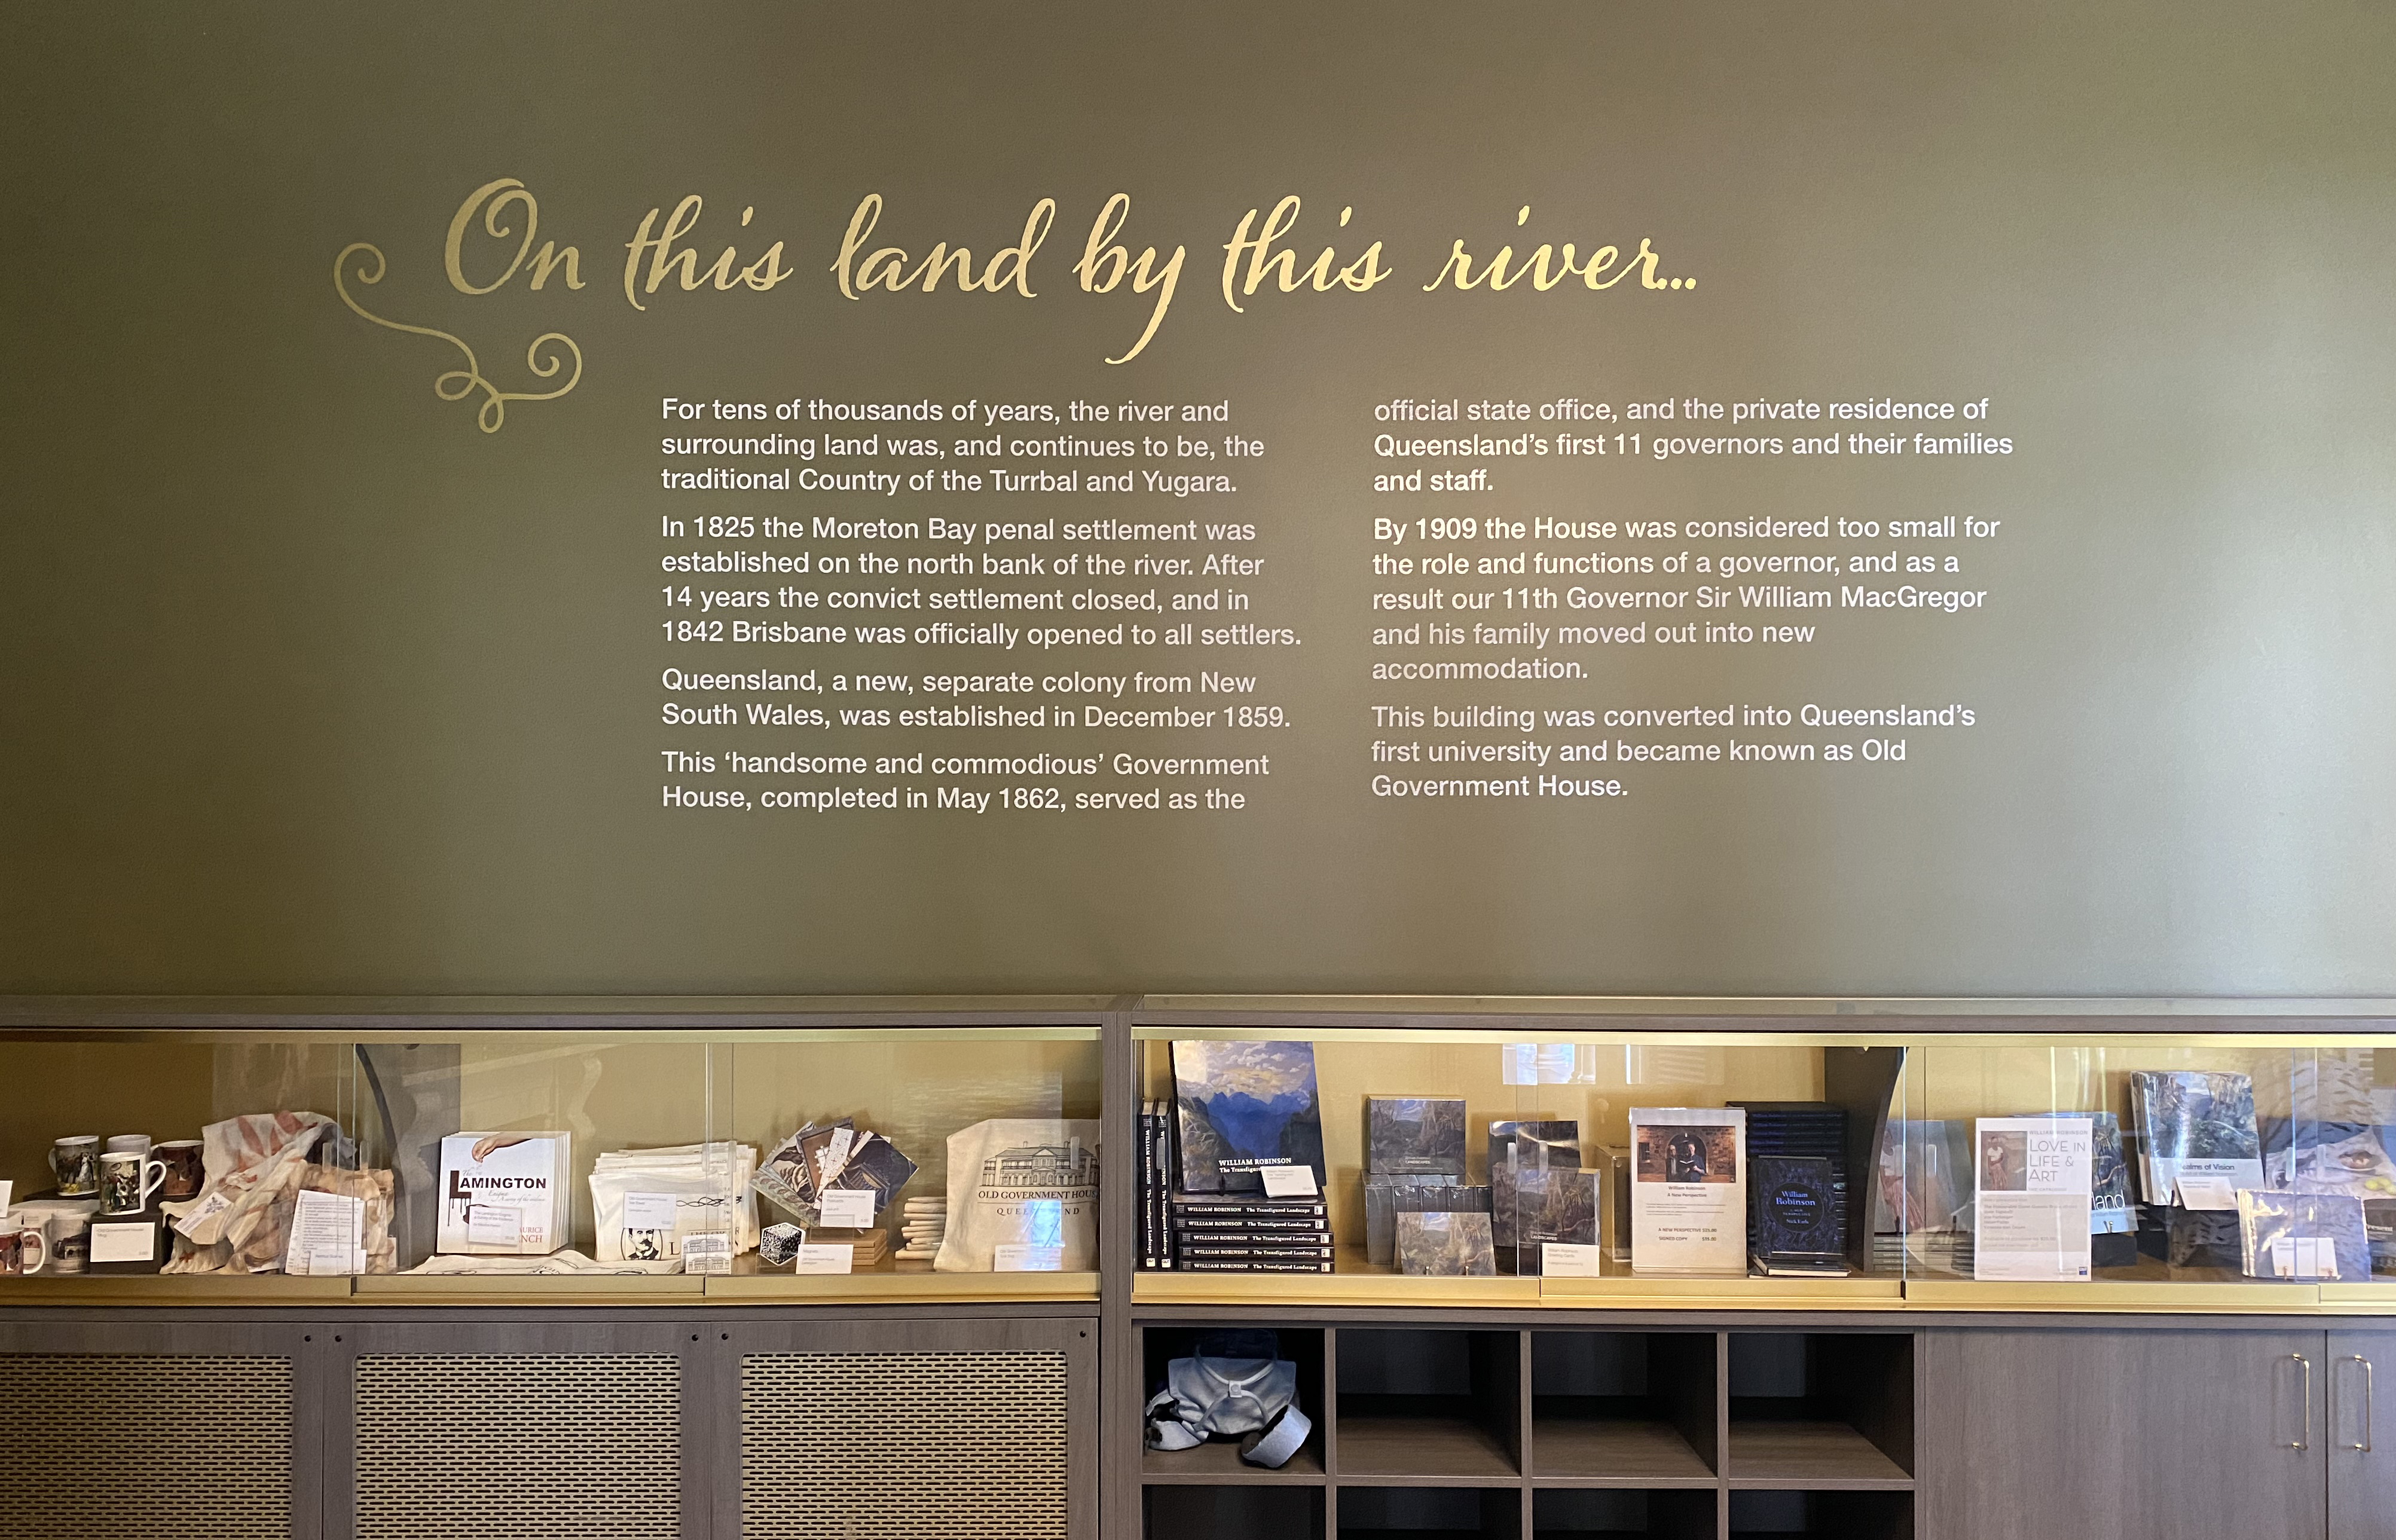 Old Government House foyer wall with text about the site and shop merchandise